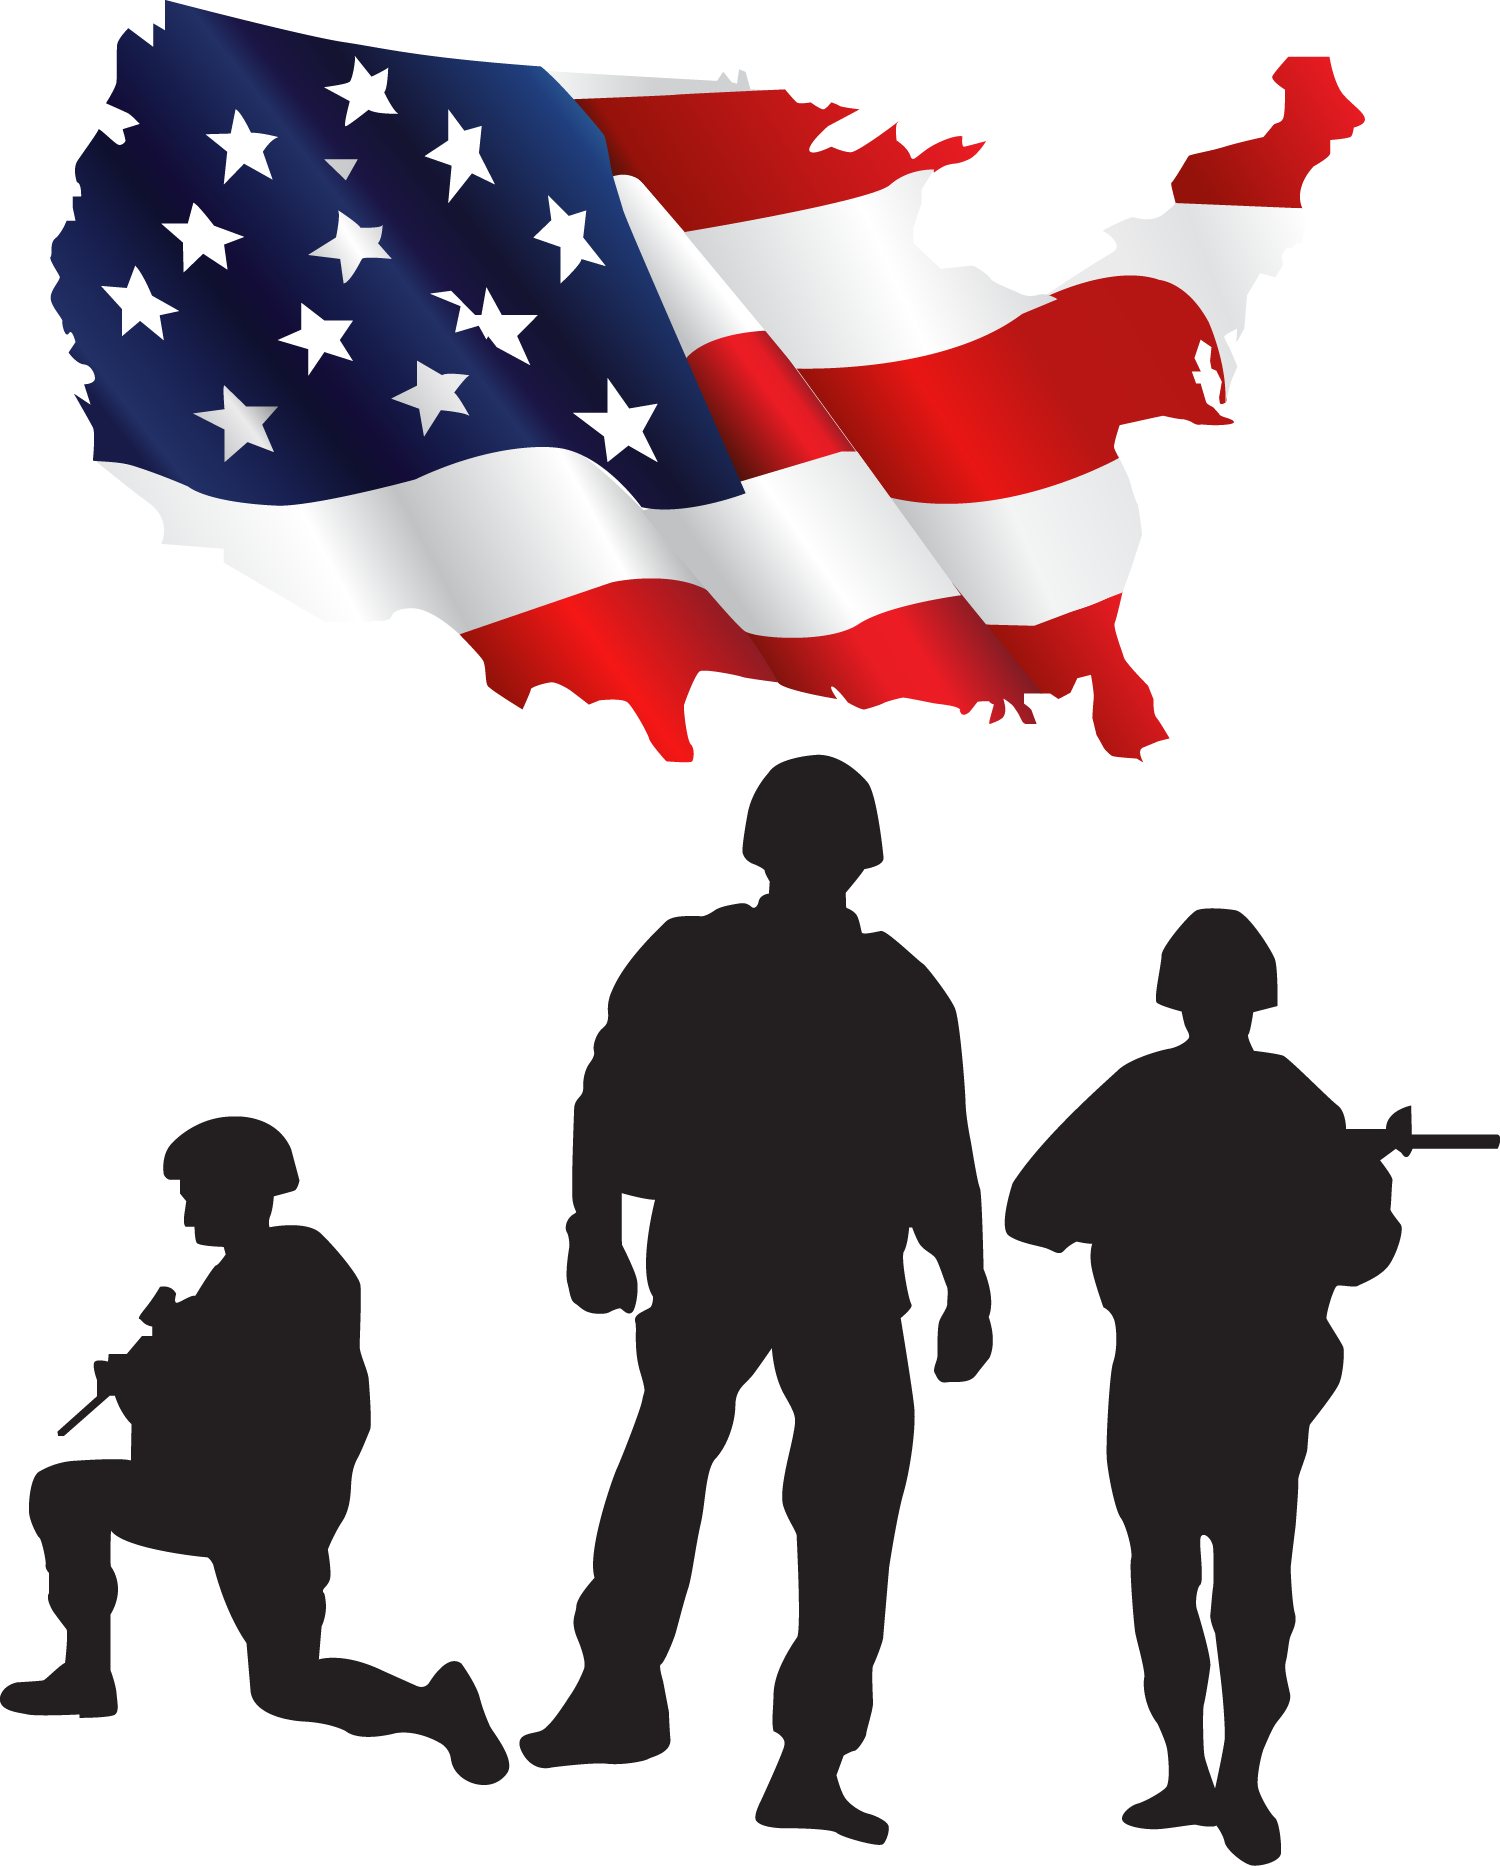 United States Soldier Salute Clip Art - Soldier Saluting Silhouette Clipart (1500x1866)